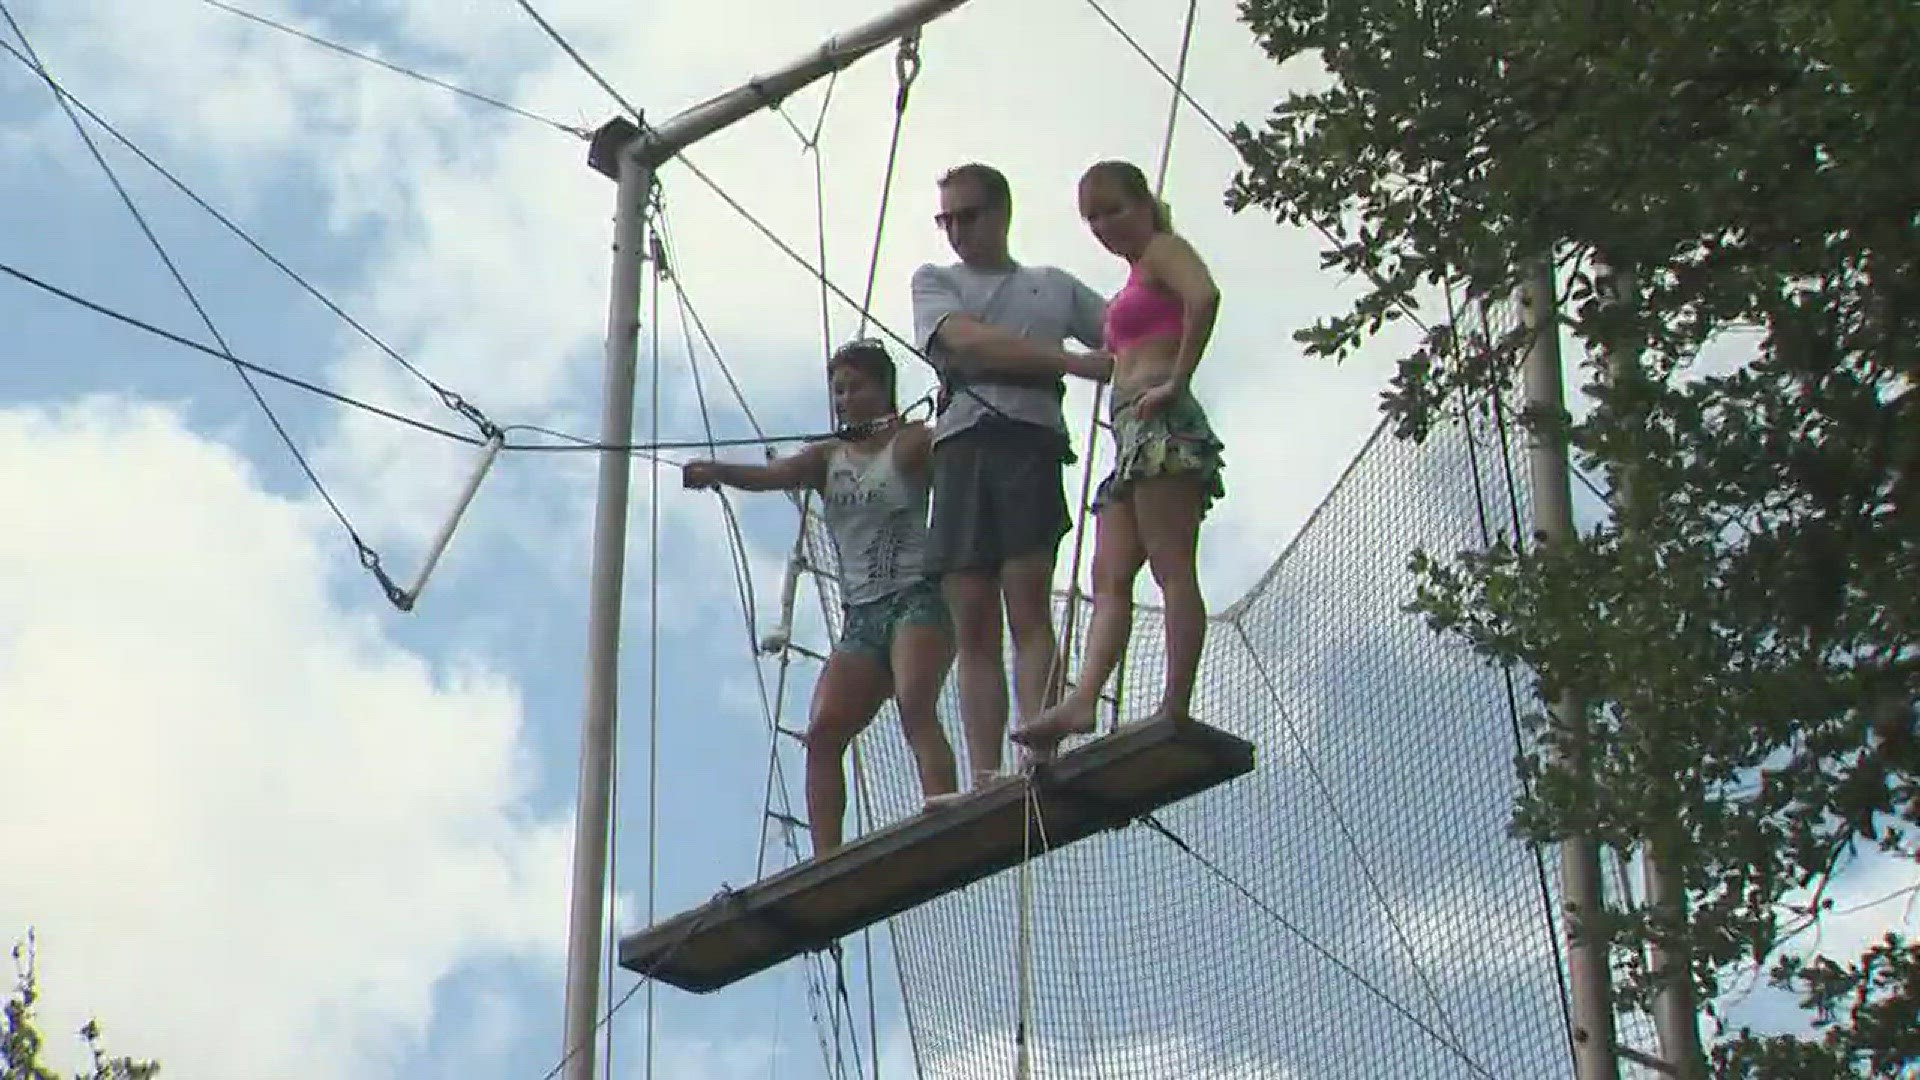 KVUE reporters Jay Wallis and Tony Plohetski stepped out of their comfort zones to give the flying trapeze a whirl with Circus of Hope in Austin.